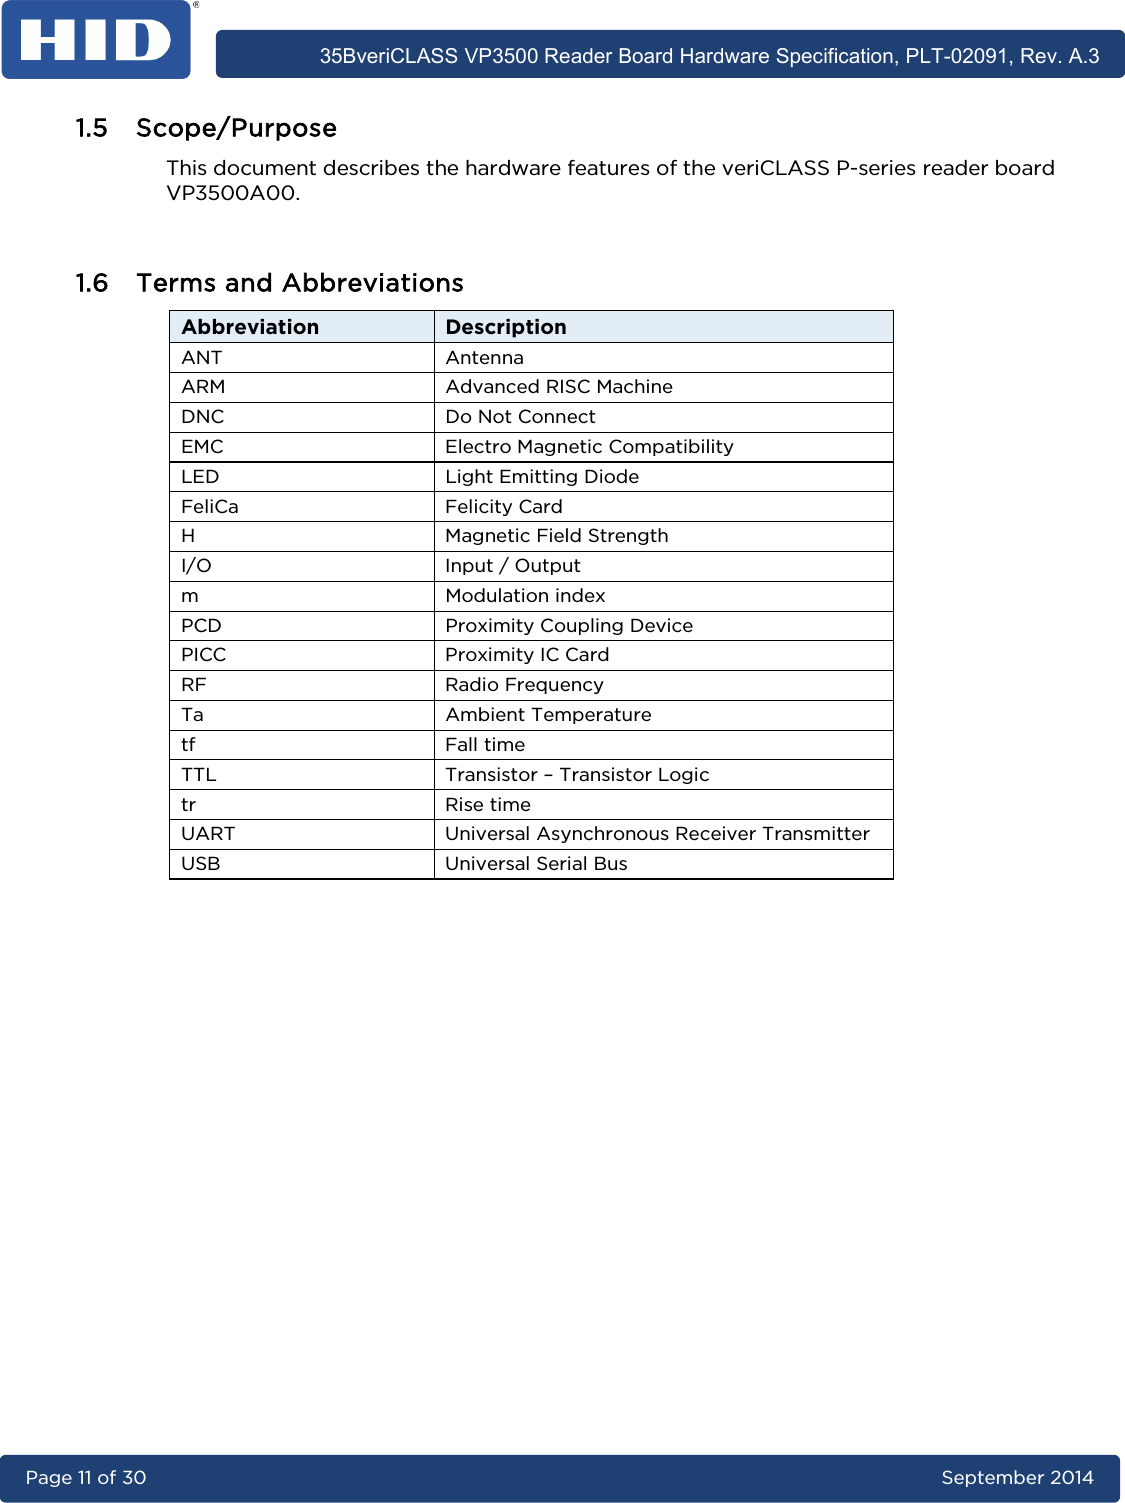      35BveriCLASS VP3500 Reader Board Hardware Specification, PLT-02091, Rev. A.3 Page 11 of 30   September 2014  1.5 Scope/Purpose This document describes the hardware features of the veriCLASS P-series reader board VP3500A00.  1.6 Terms and Abbreviations Abbreviation Description ANT Antenna ARM Advanced RISC Machine DNC Do Not Connect EMC Electro Magnetic Compatibility LED Light Emitting Diode FeliCa Felicity Card H  Magnetic Field Strength I/O Input / Output m  Modulation index PCD Proximity Coupling Device PICC Proximity IC Card RF Radio Frequency Ta Ambient Temperature tf Fall time TTL Transistor – Transistor Logic tr Rise time UART Universal Asynchronous Receiver Transmitter USB  Universal Serial Bus  